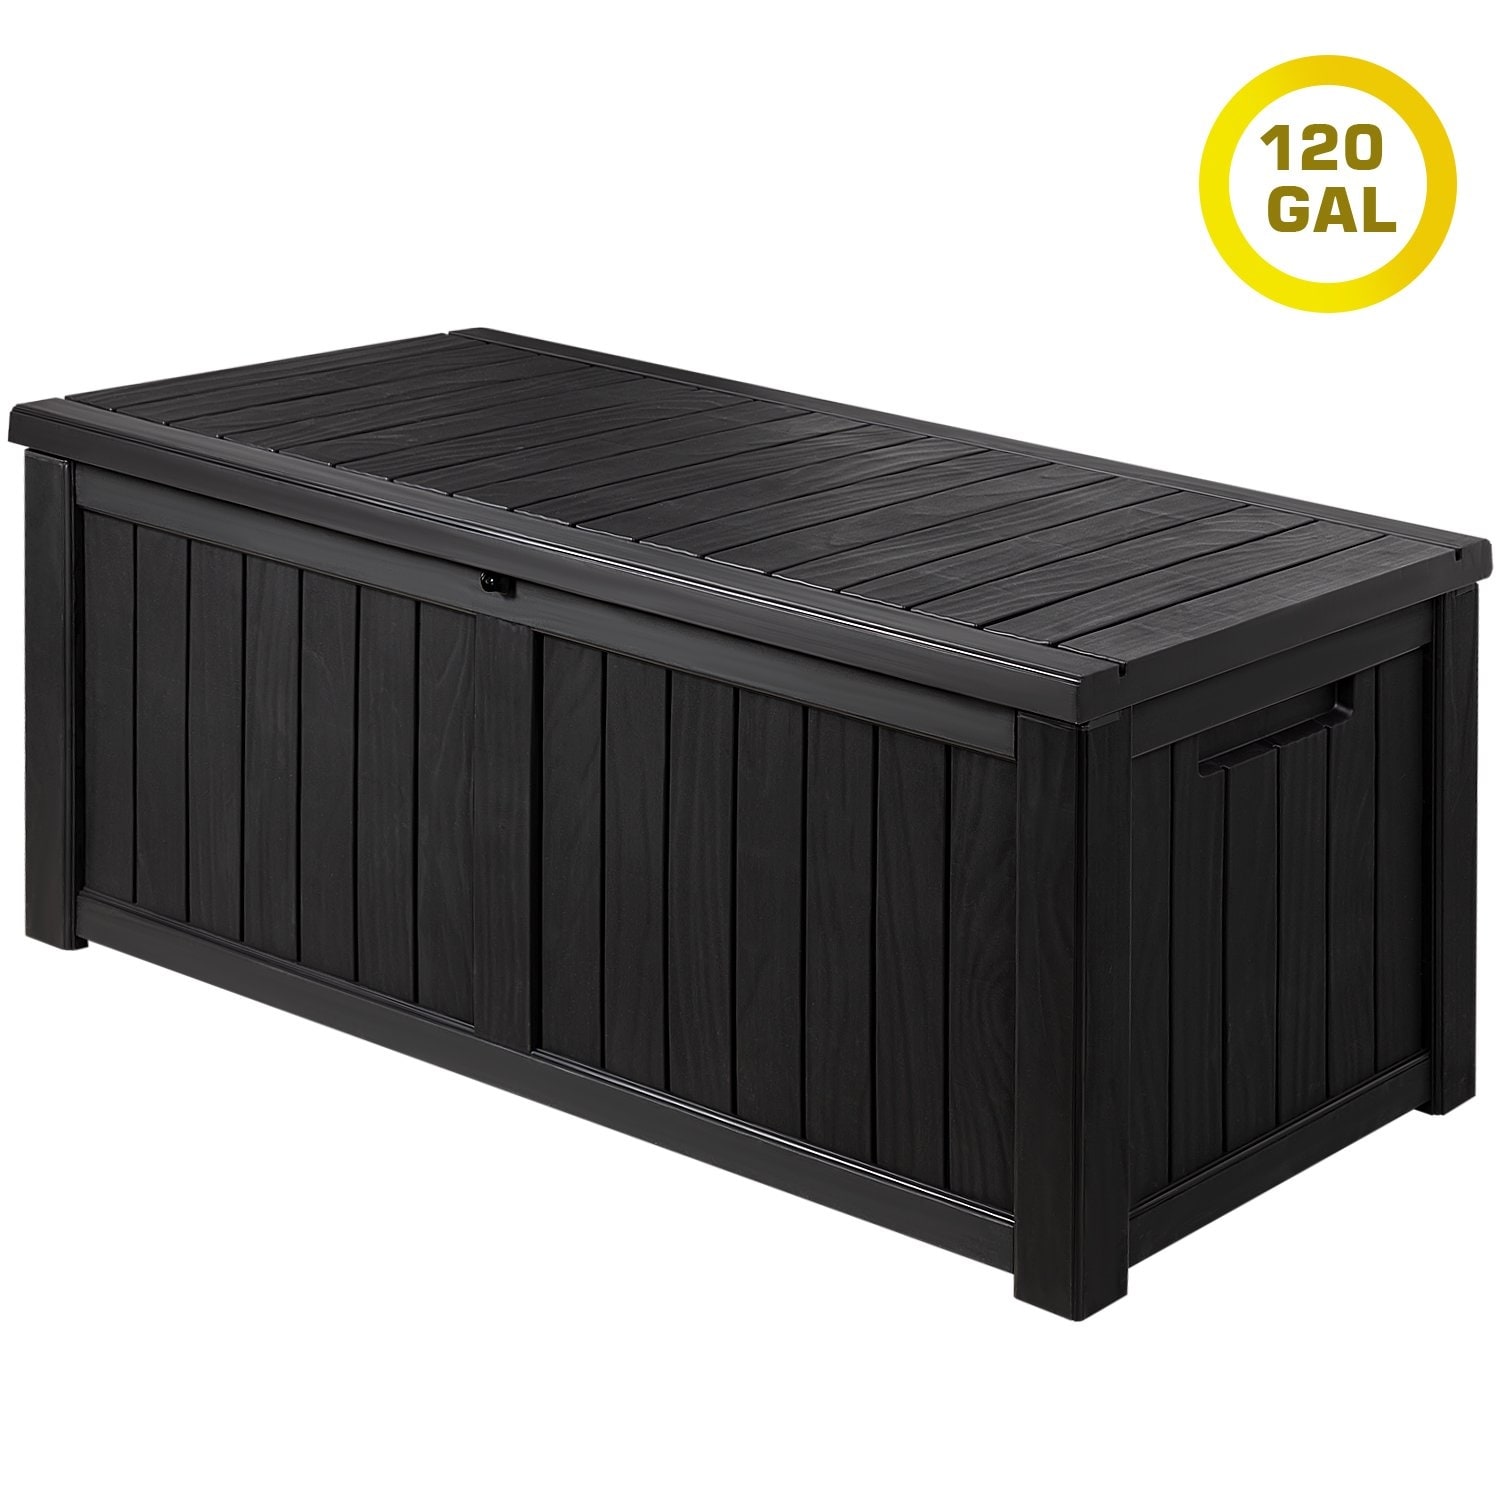 14 Best Deck Boxes - Outdoor and Patio Storage Solutions